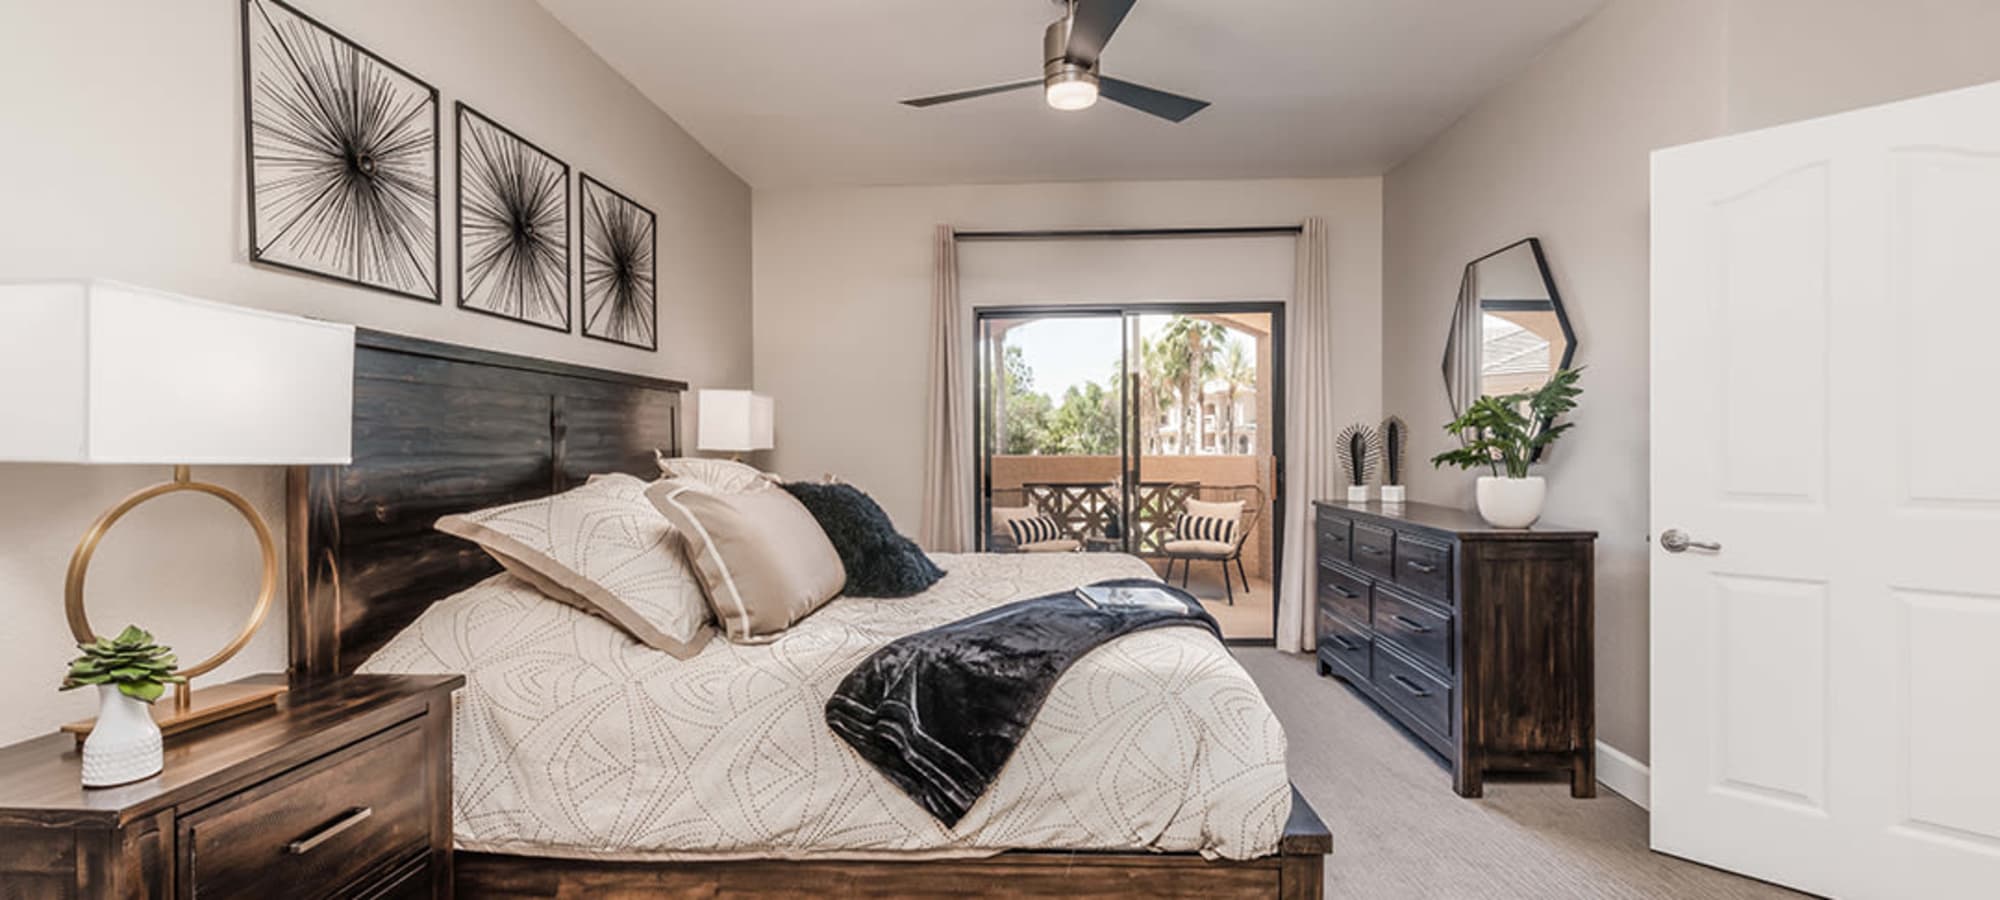 Ceiling fan in the bedroom to keep you cool on a hot day at Ascend at Kierland in Scottsdale, Arizona